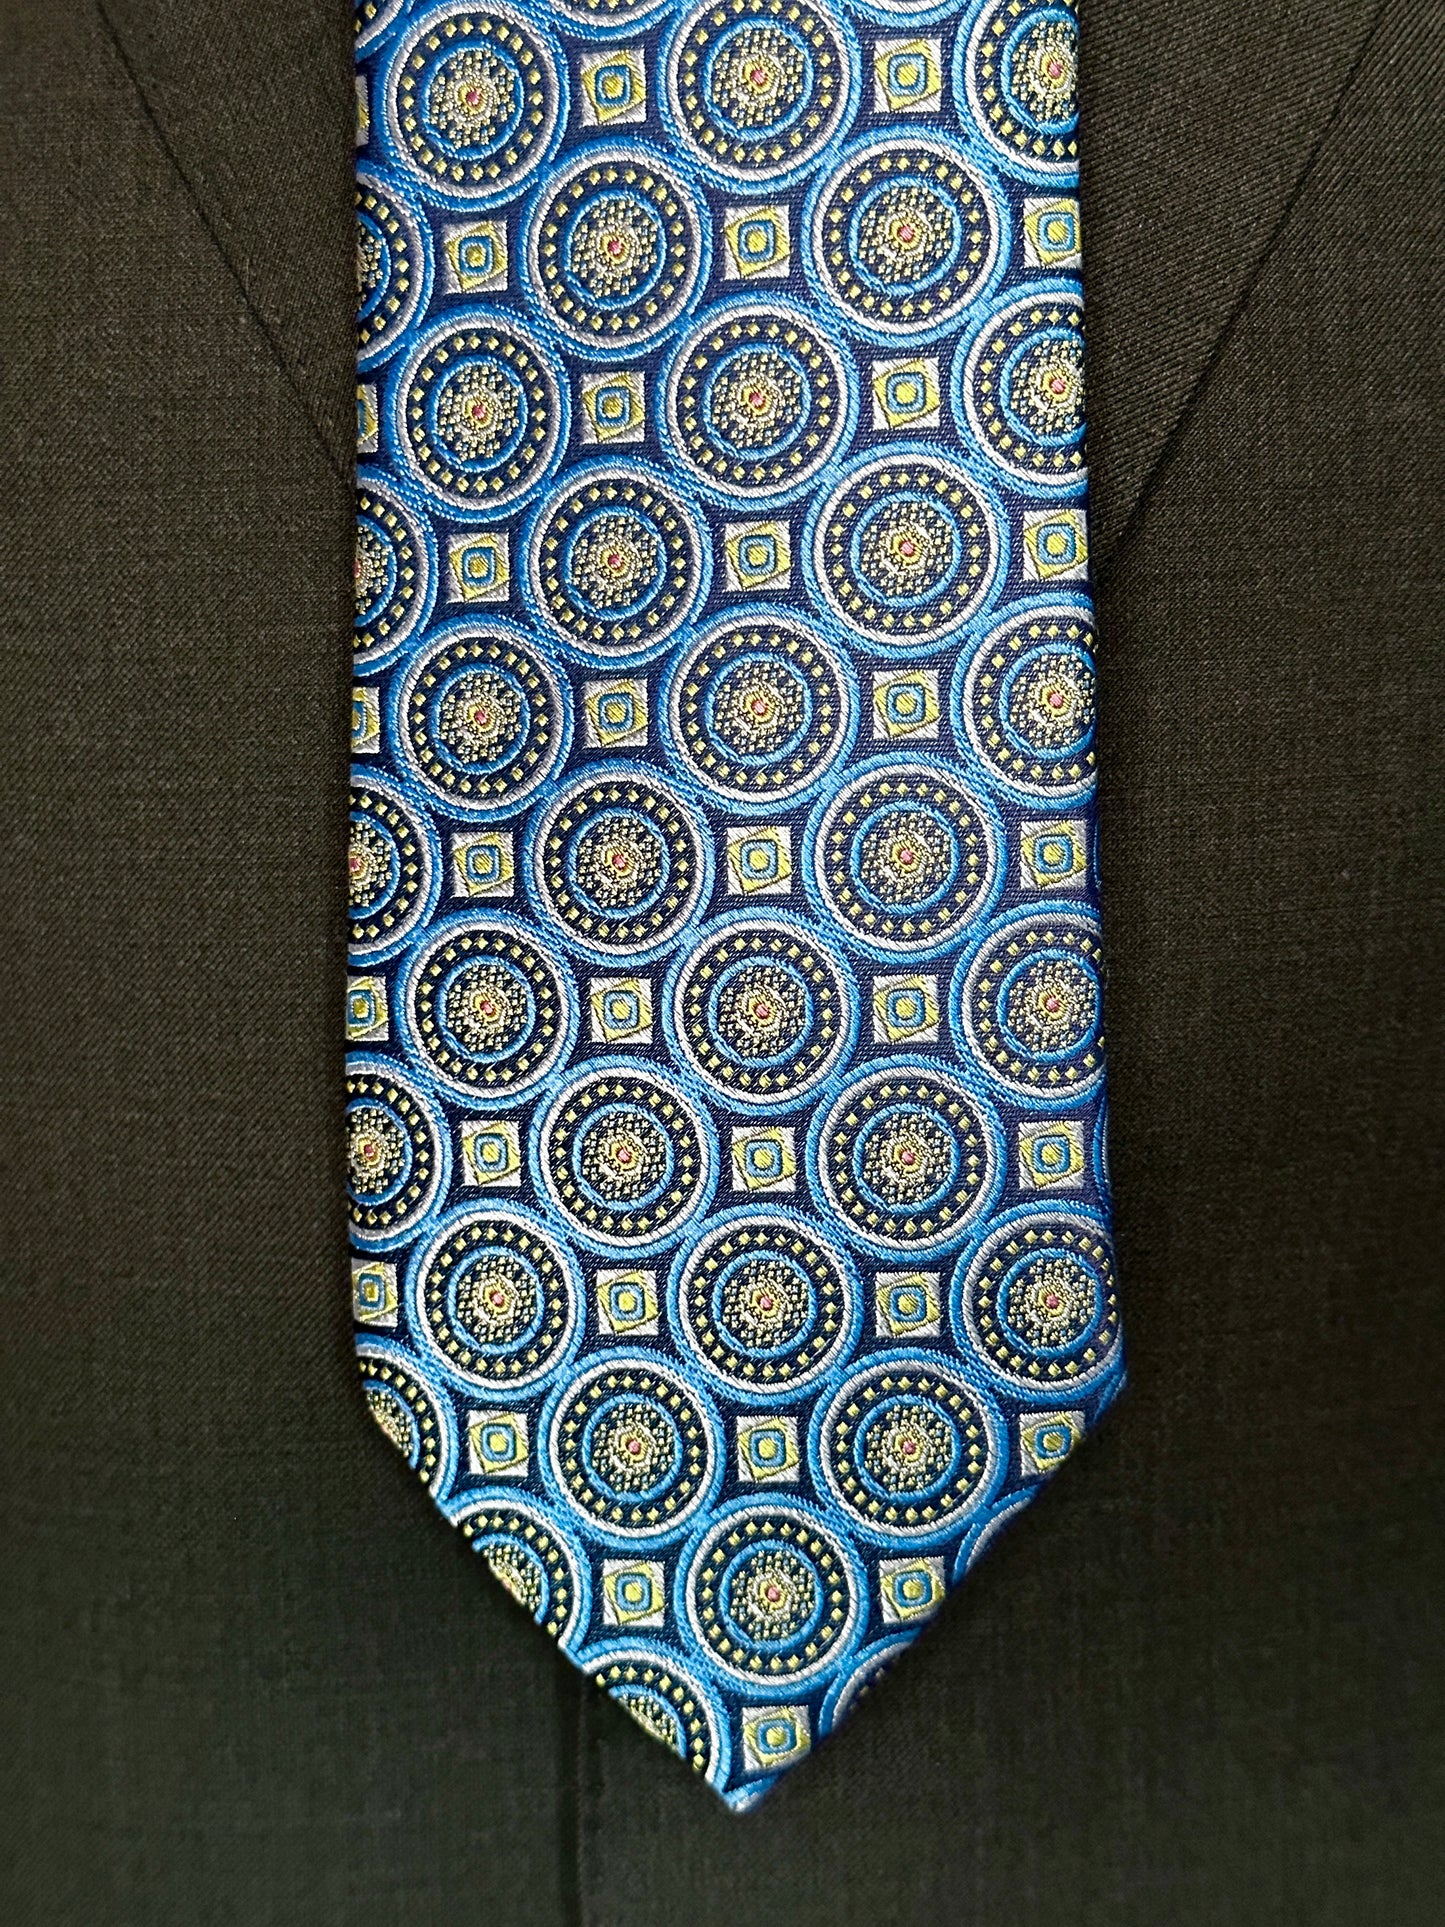 This 100% woven silk tie has a gorgeous weight and thickness to the finish. With woven medallions in shades of blue and taupe, this is a necktie that makes a statement. To be worn with shirts in white, blue, beige and grey. This tie also pairs well with shirts with small plaids and mini checks. See the sister color in purple.